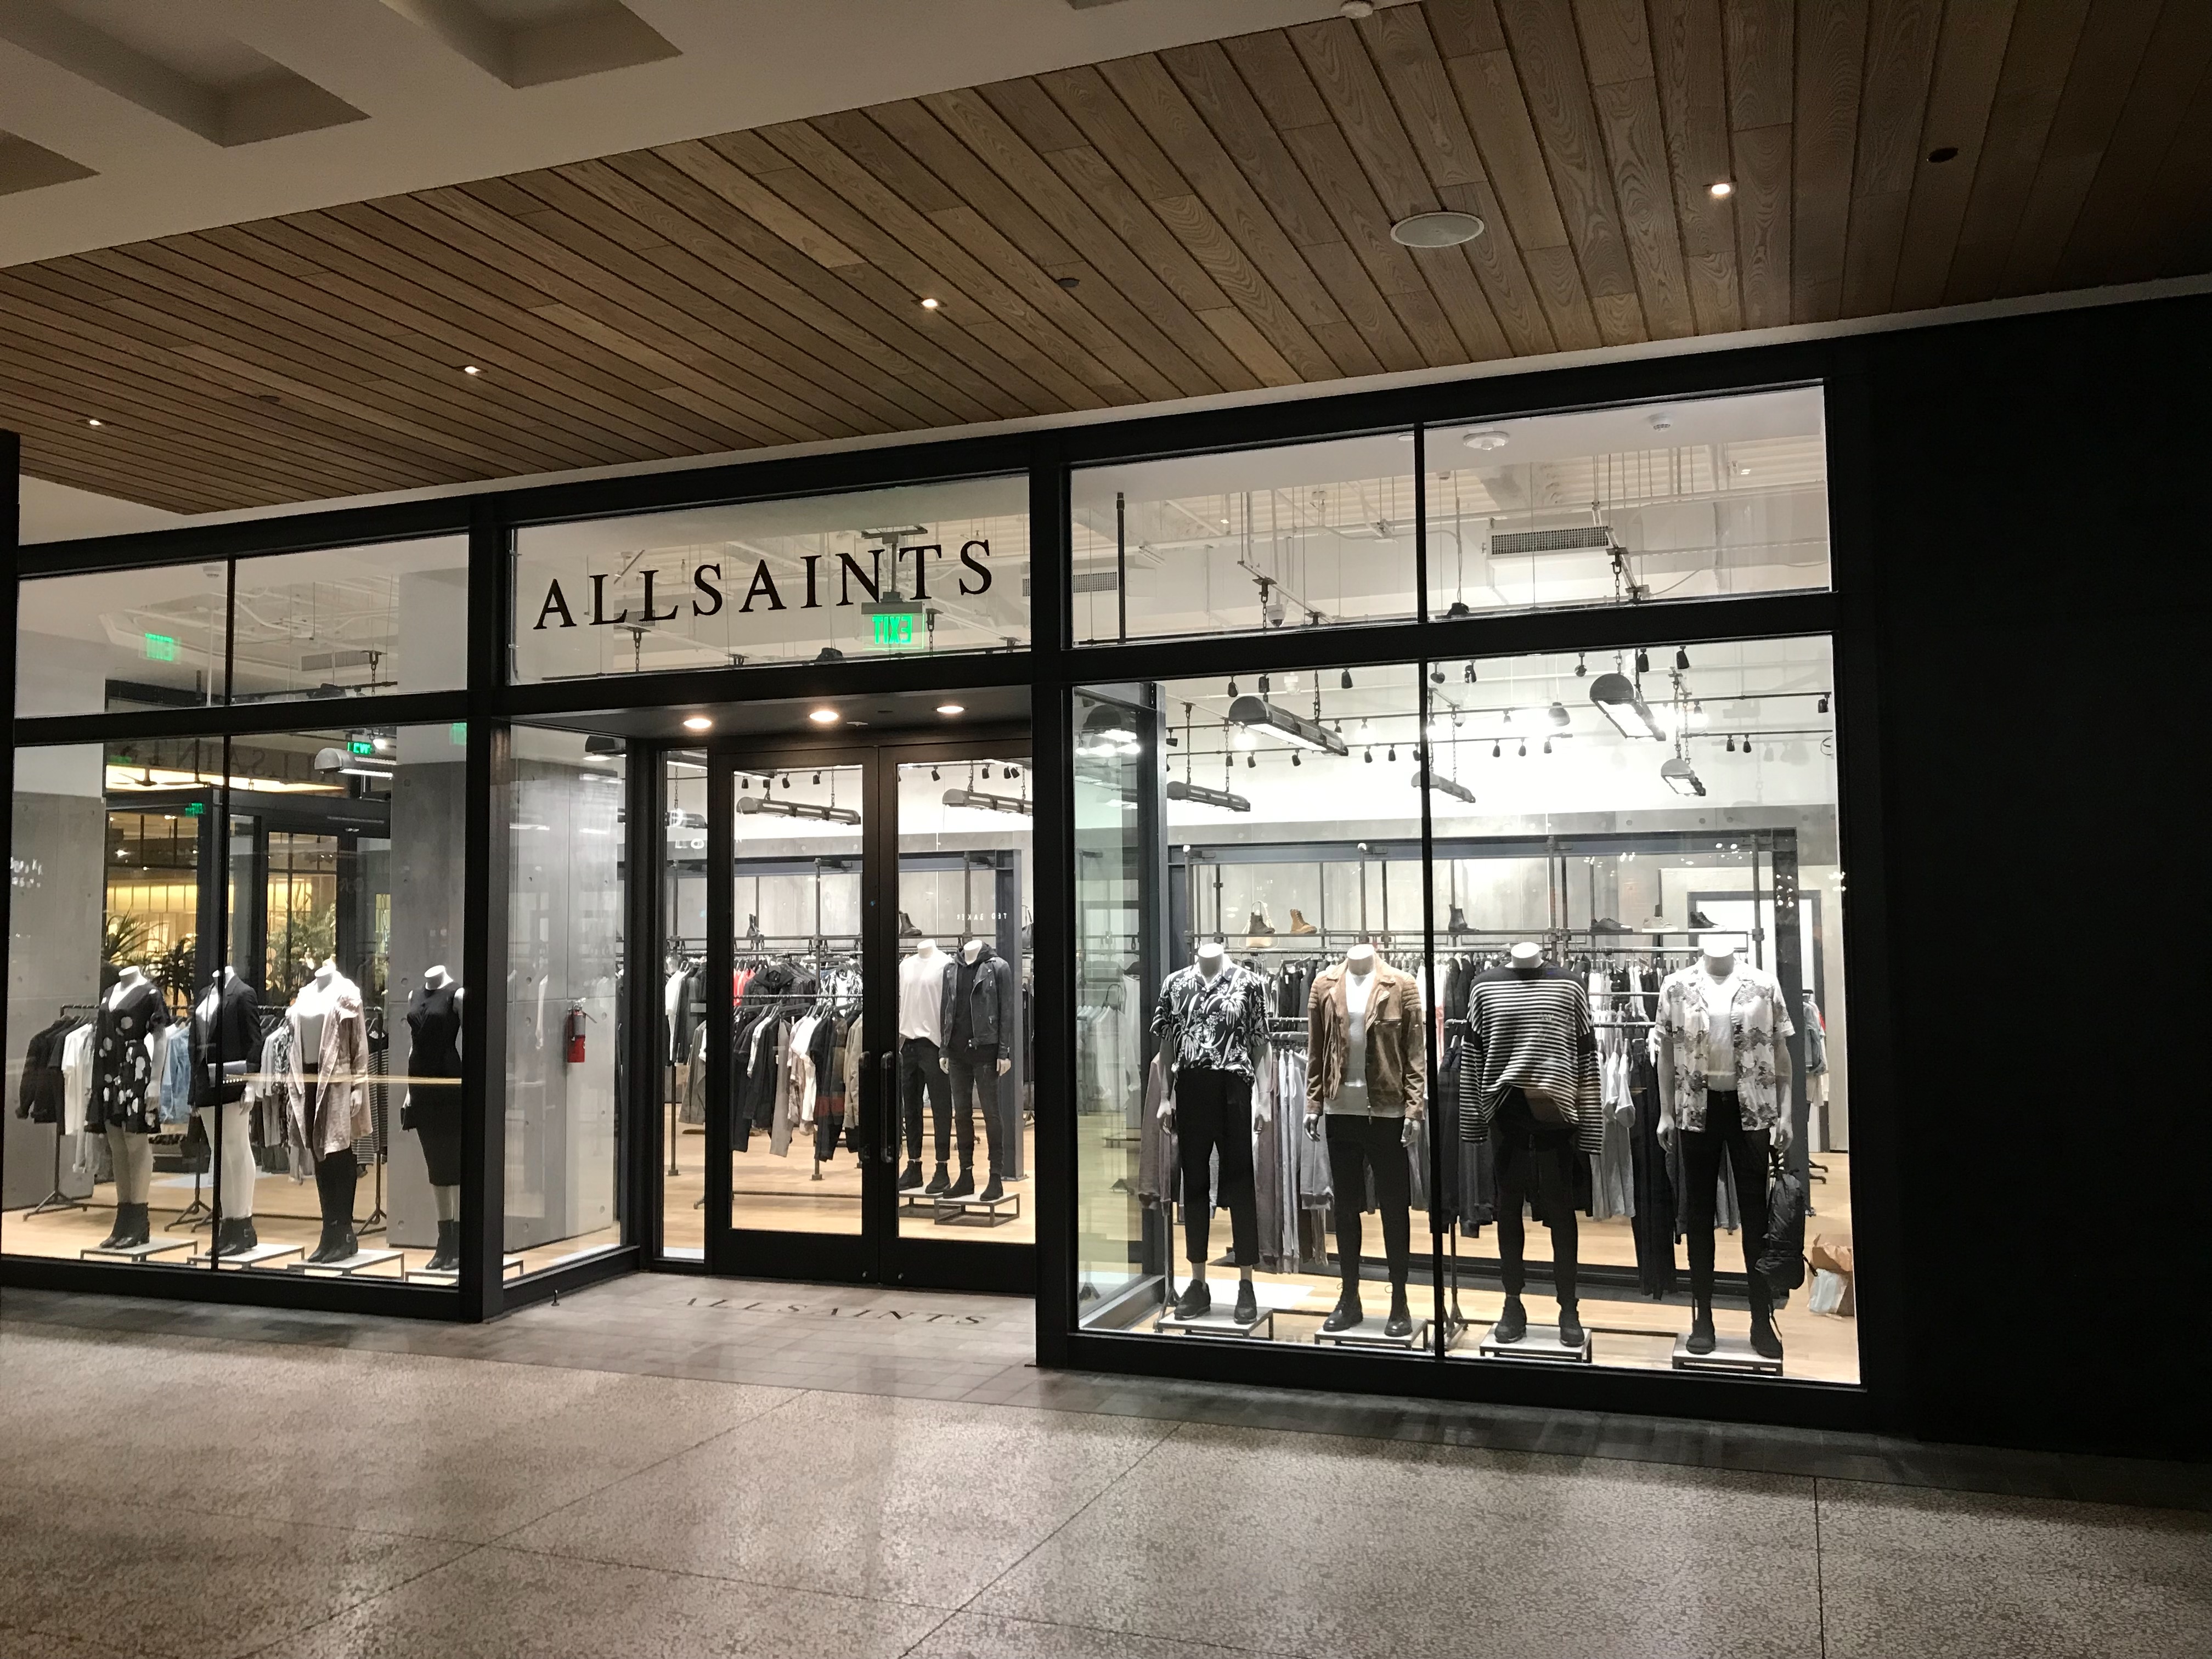 AllSaints at Fashion Valley - A Shopping Center in San Diego, CA